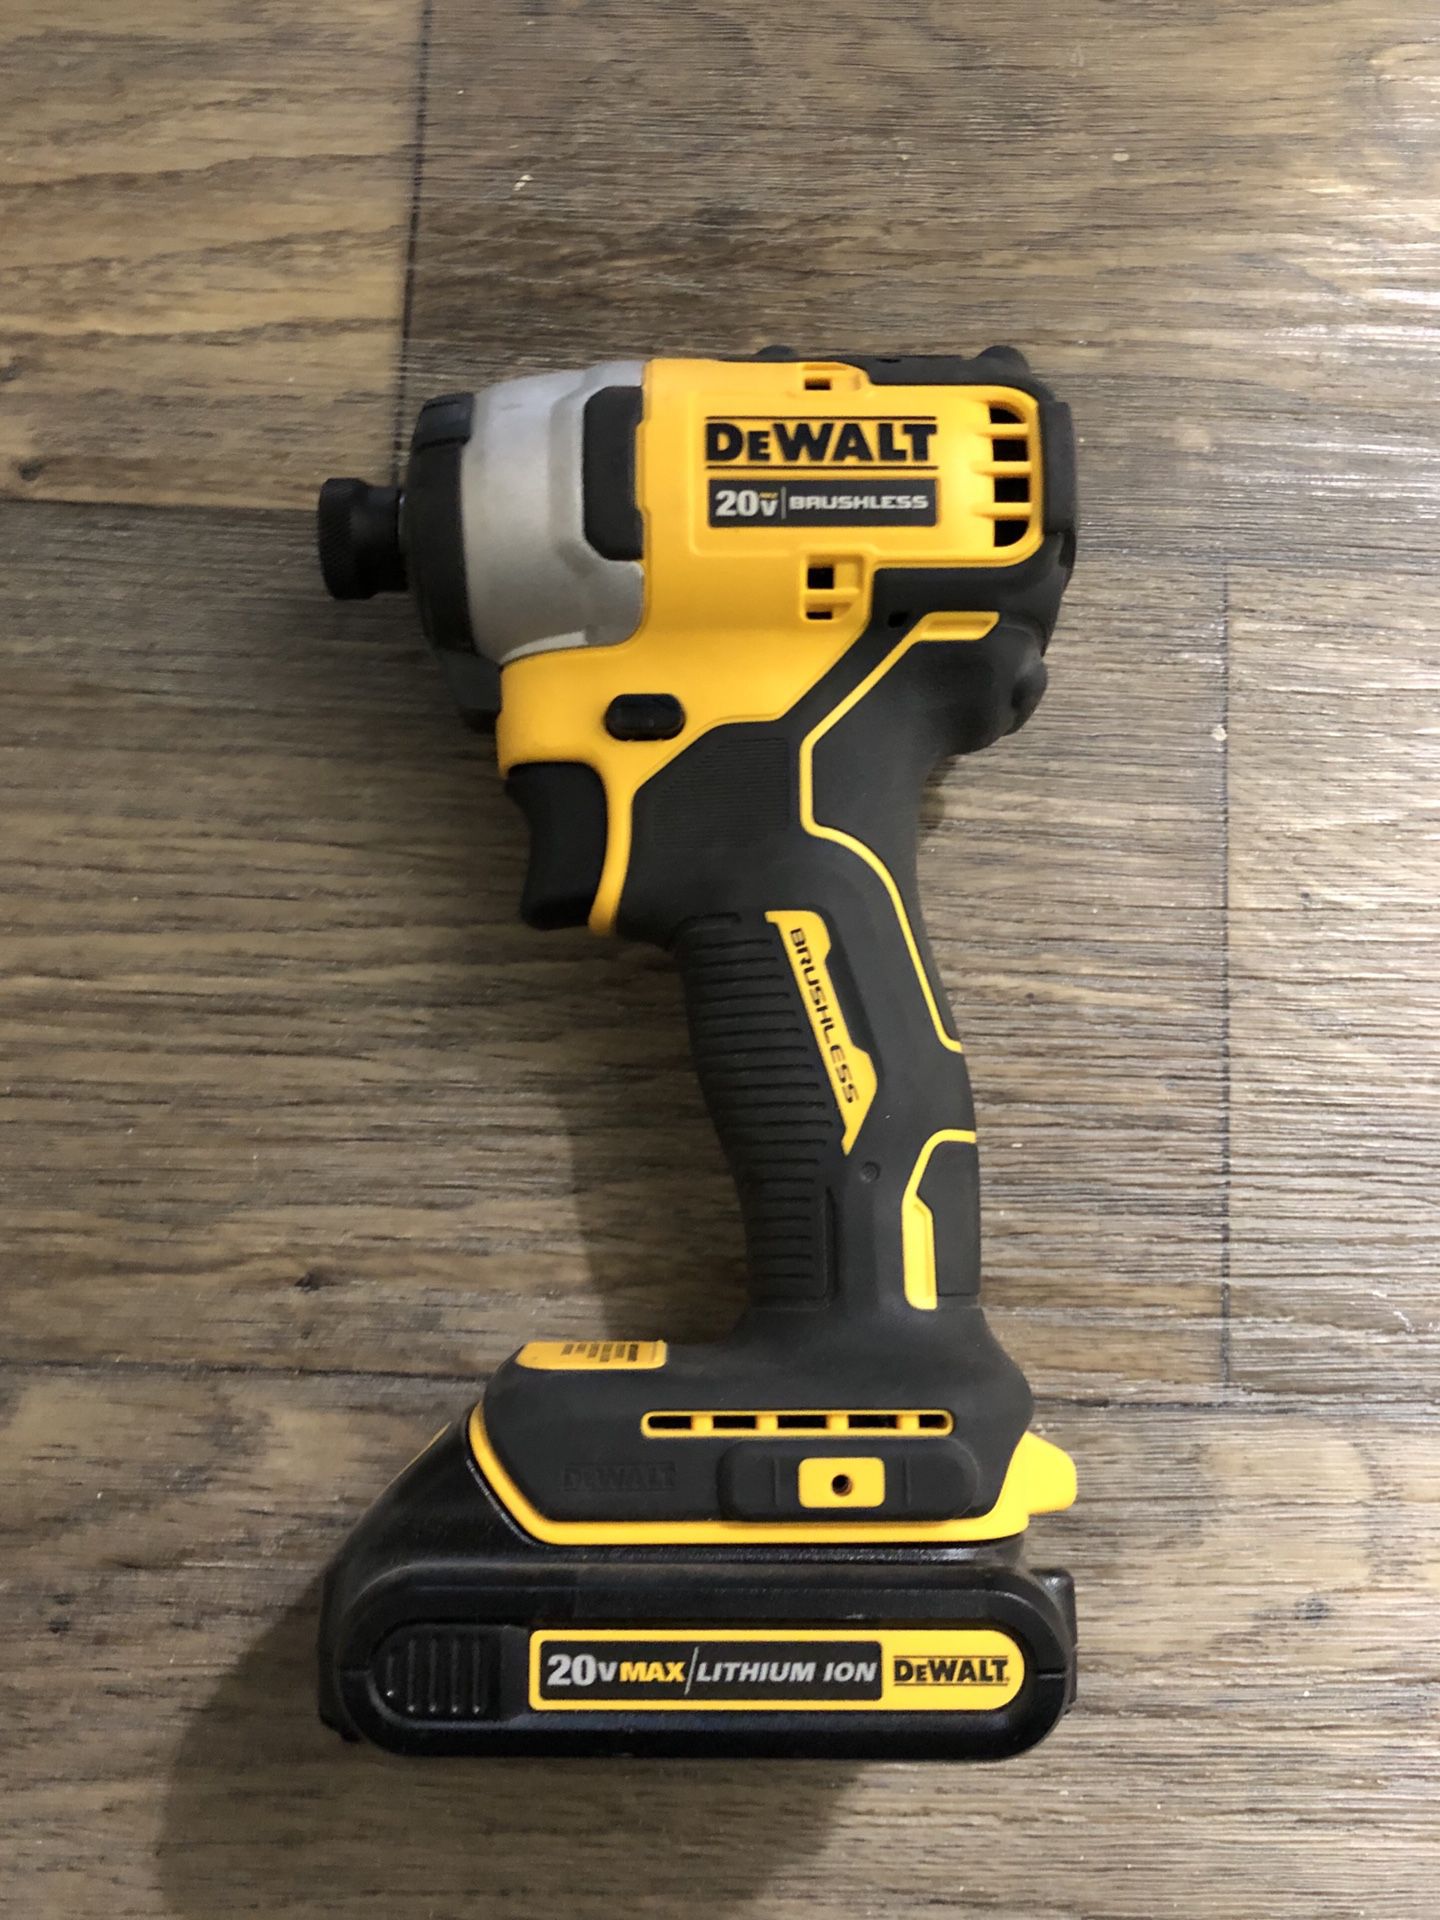 Dewalt Atomic Impact Driver (tool and battery)